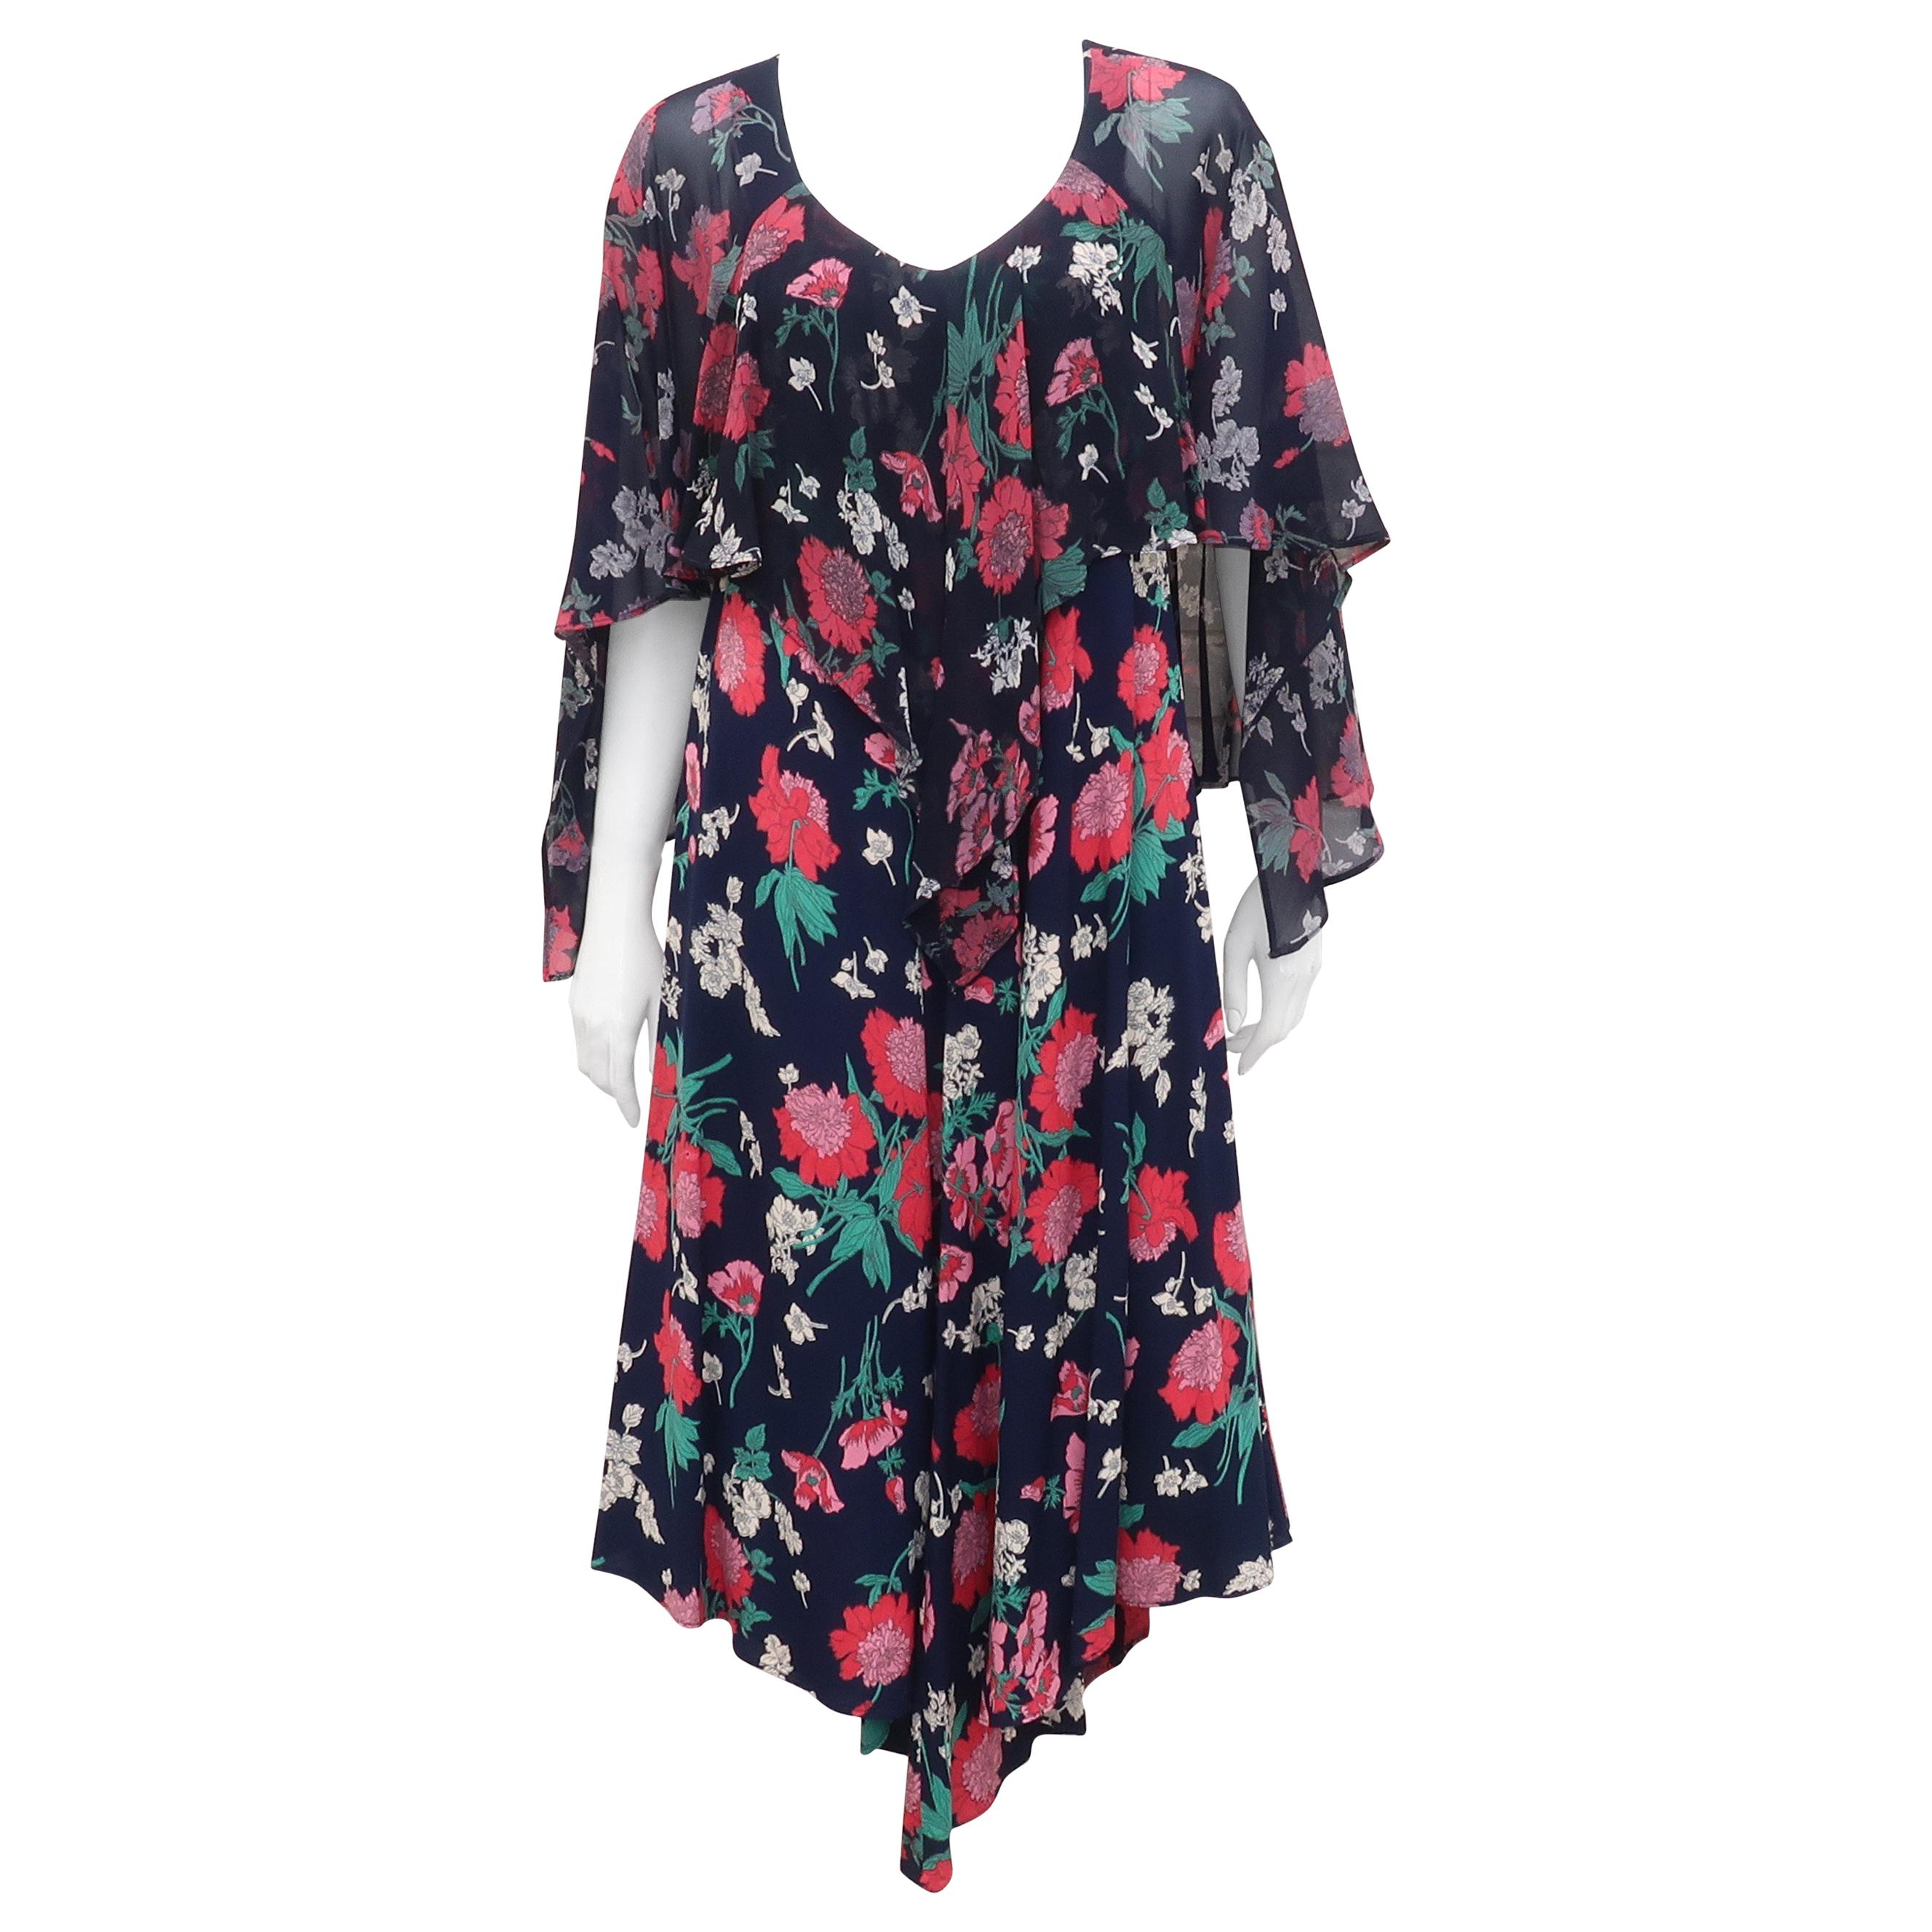 Early Nicole Miller 1970's Floral Bohemian Dress With Overlay 